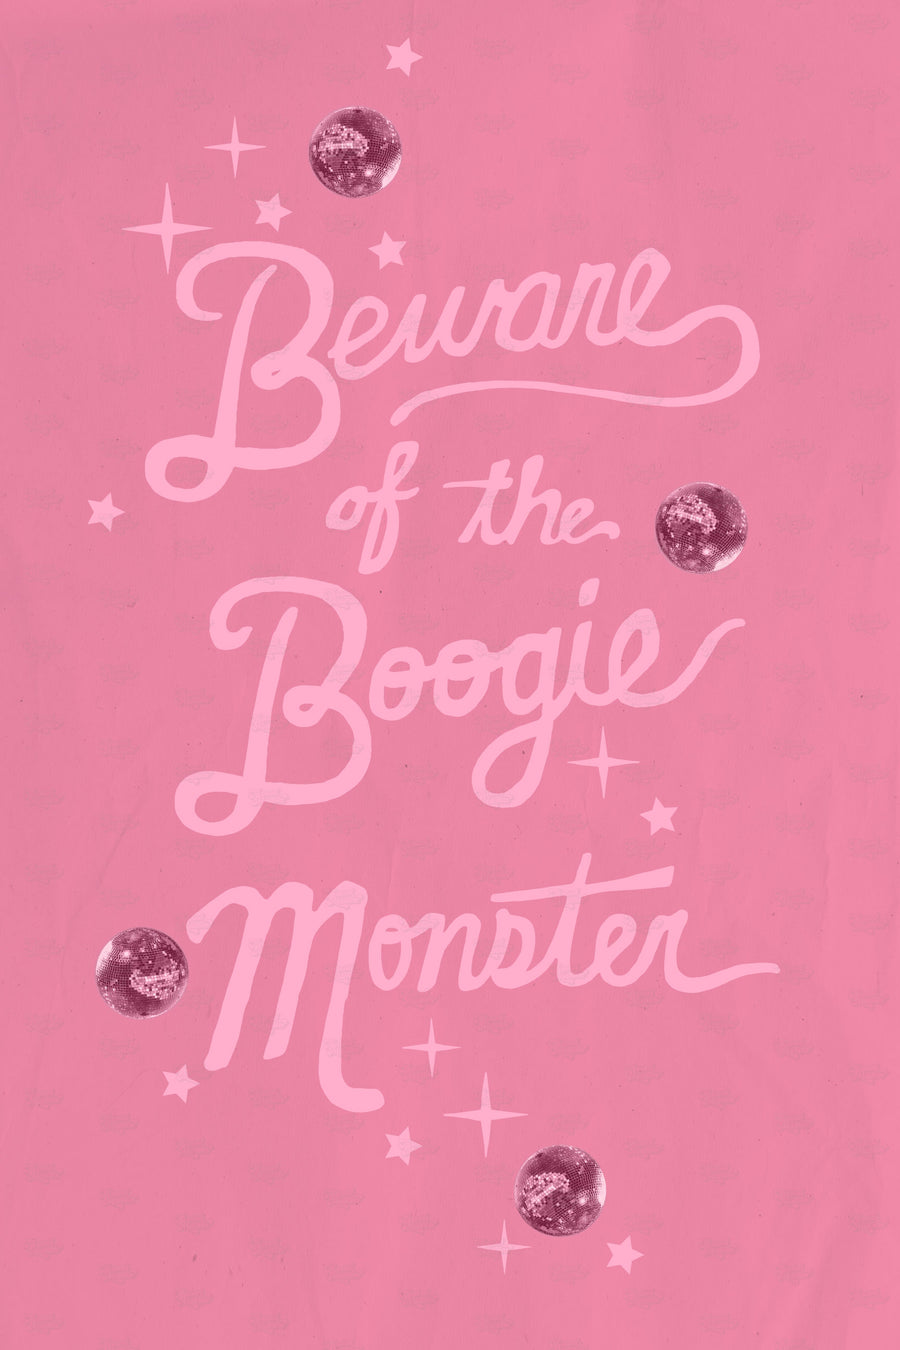 Beware of the Boogie Monster  (Set 2) / OPAL + OLIVE X THREAD MAMA